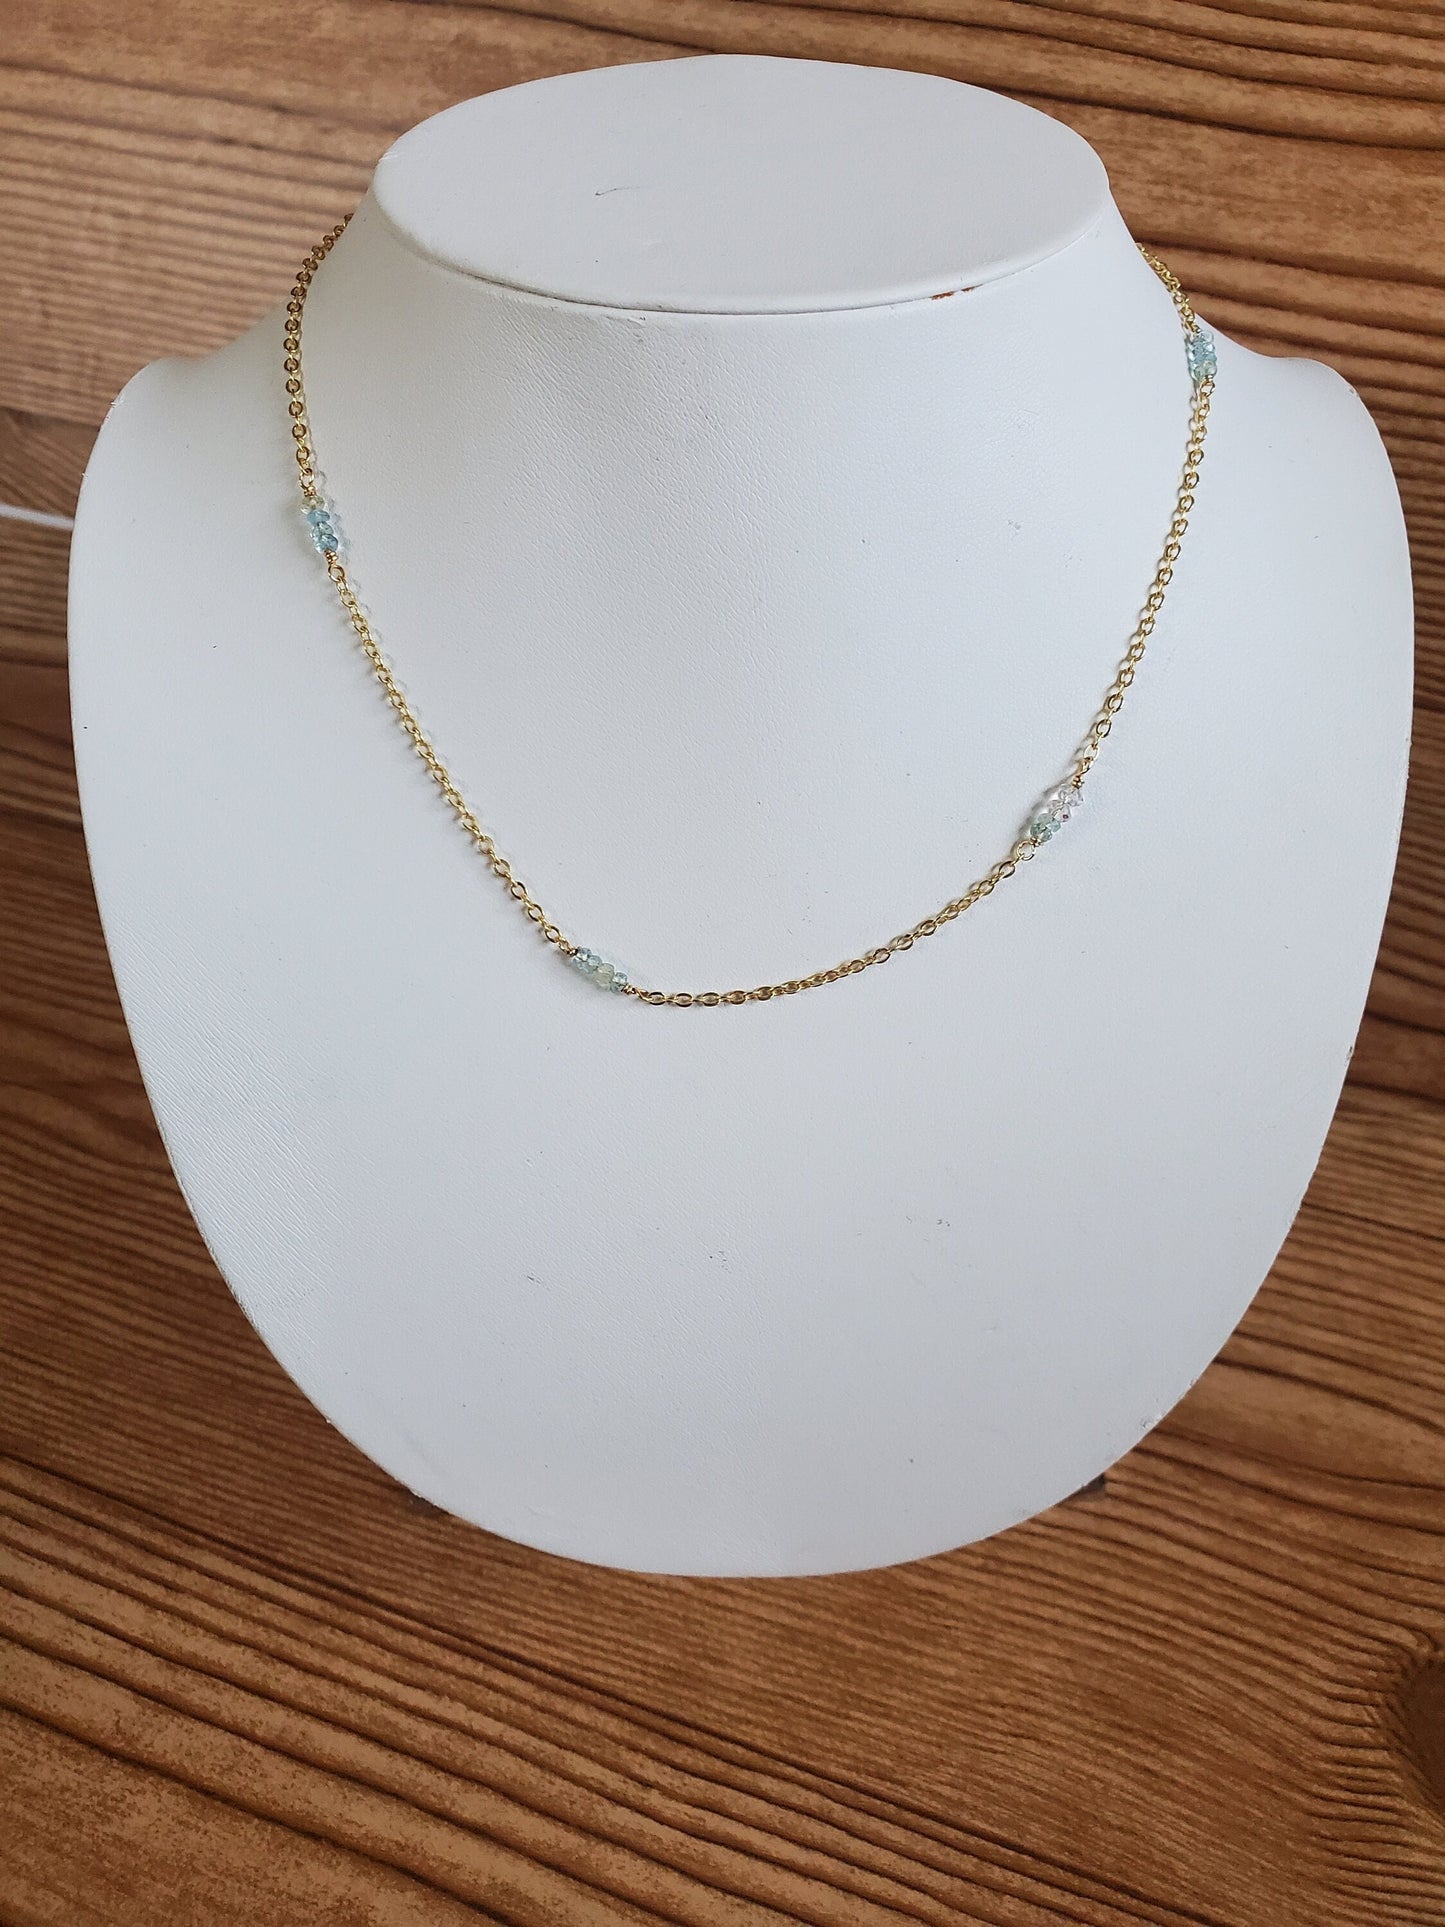 Delicate Aquamarine and Gold Chain Necklace